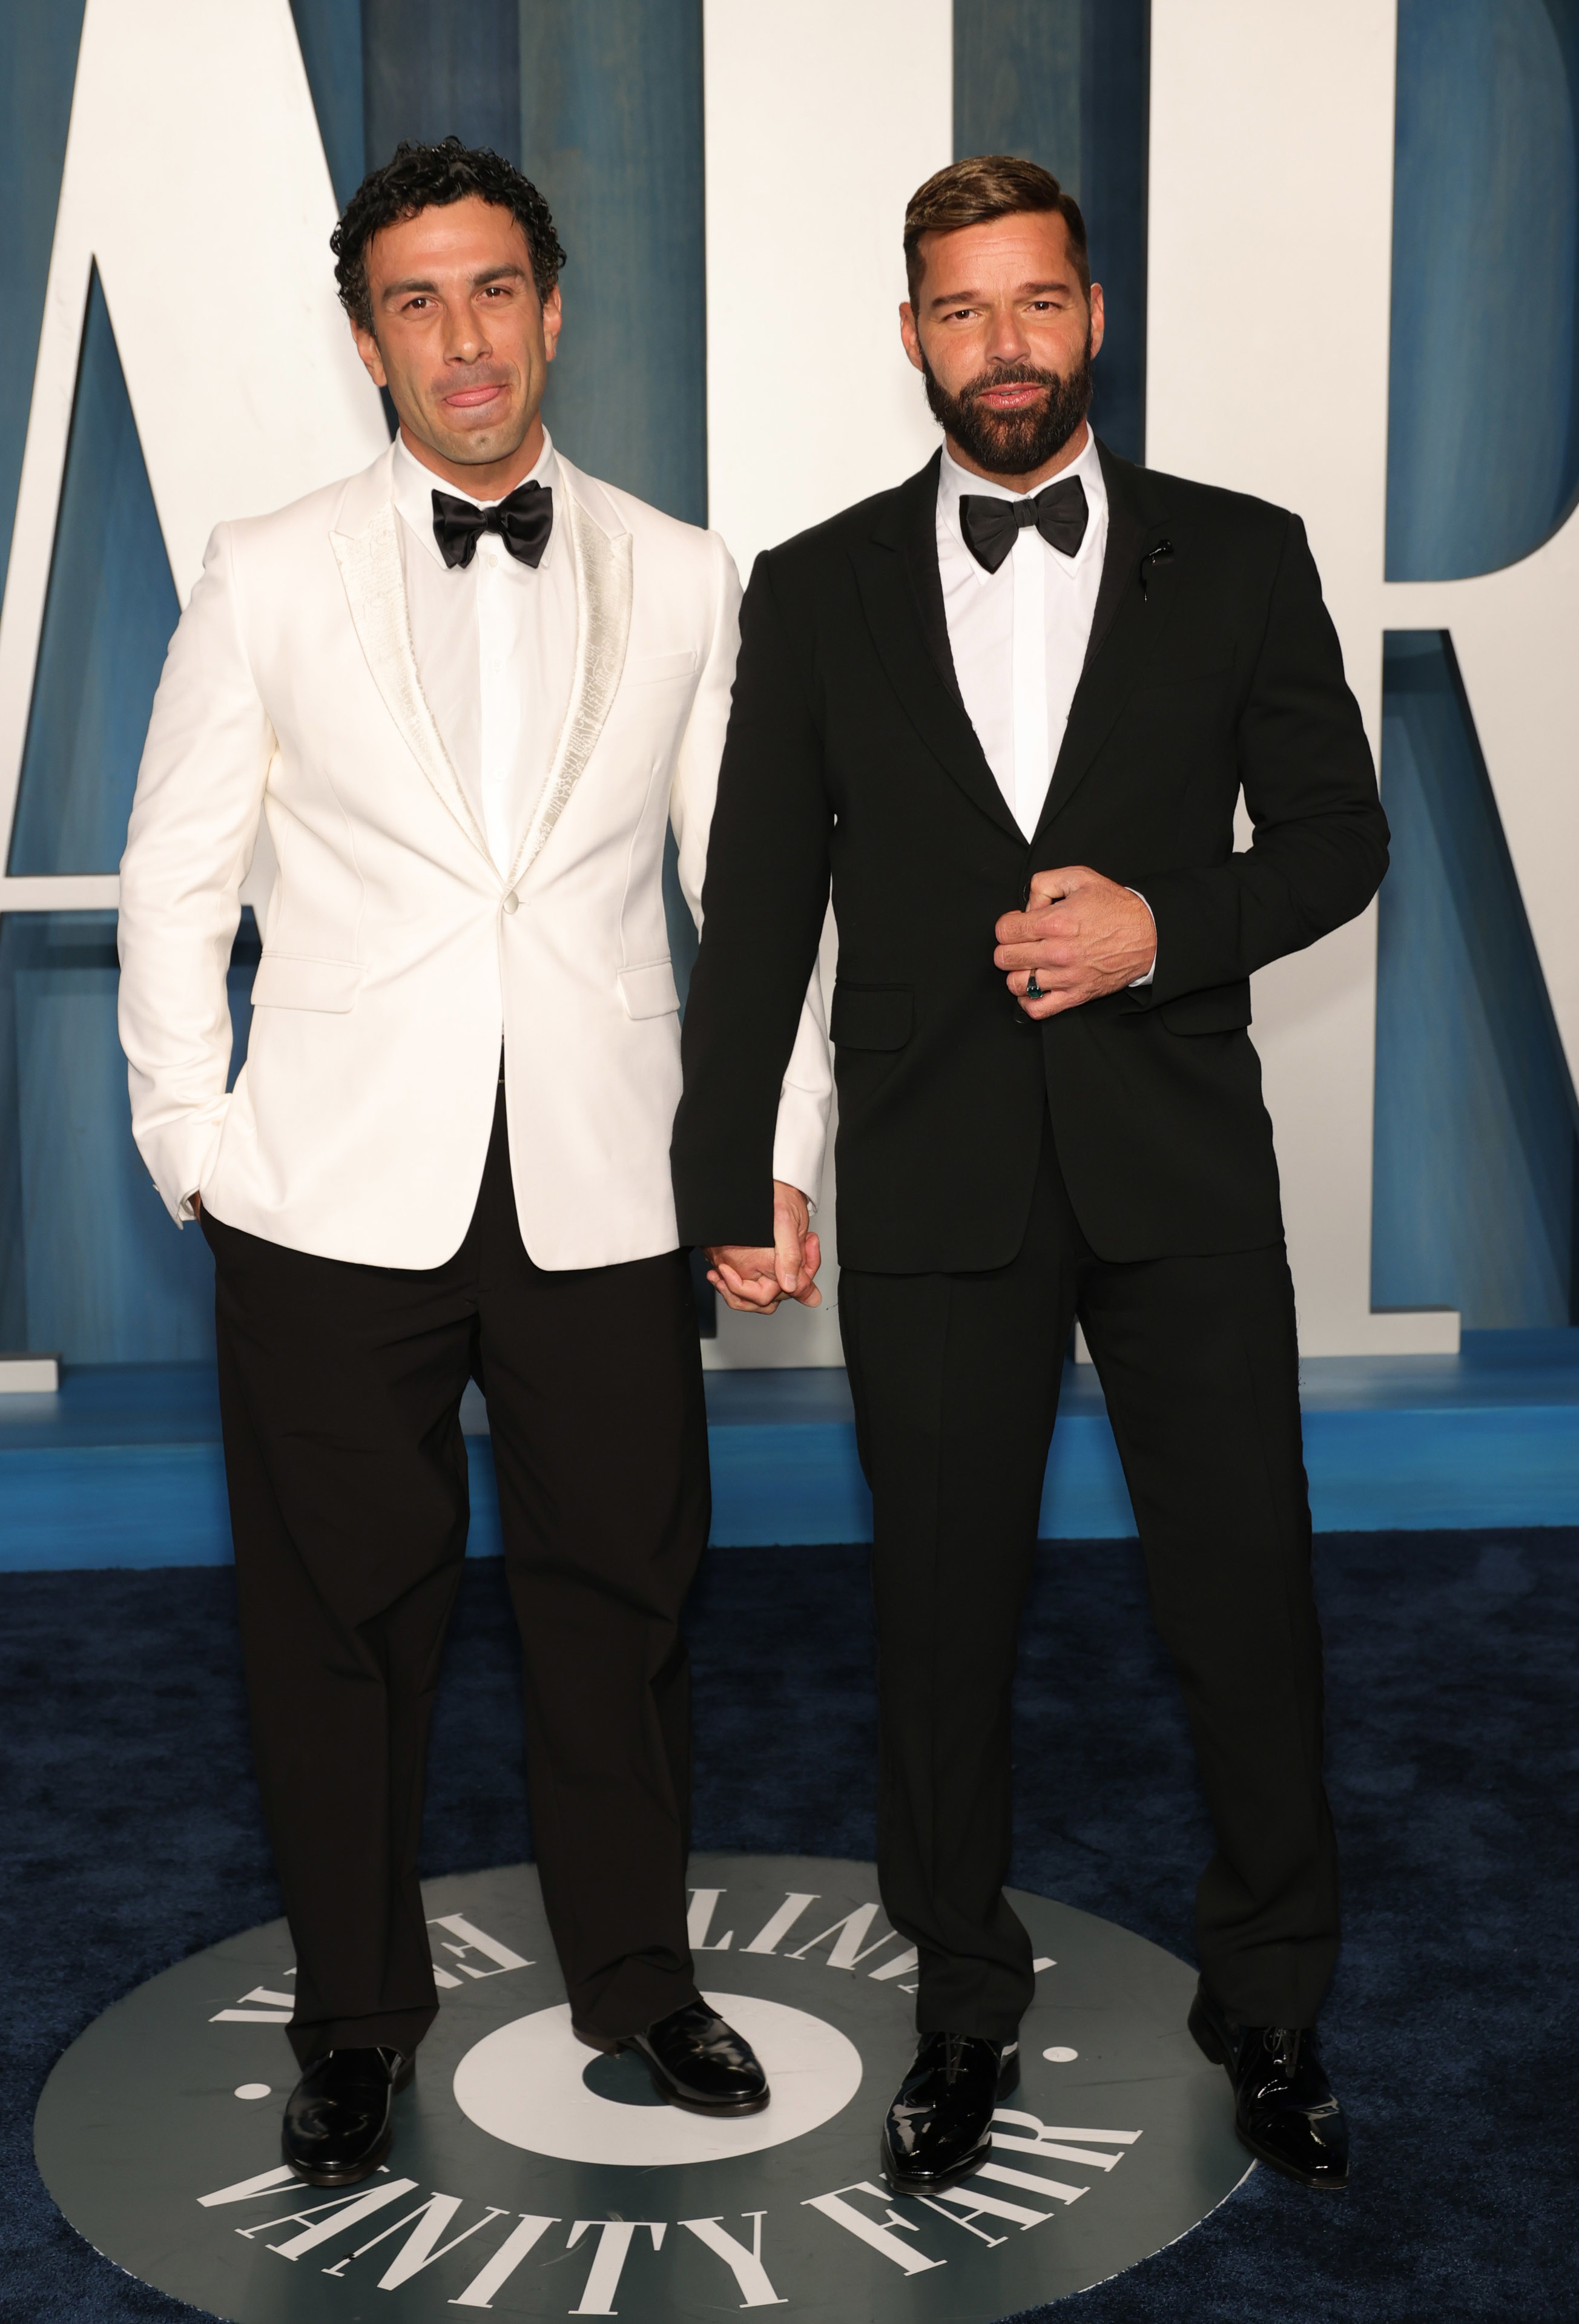 Ricky and Jwan holding hands and wearing suits and bow ties at a media event